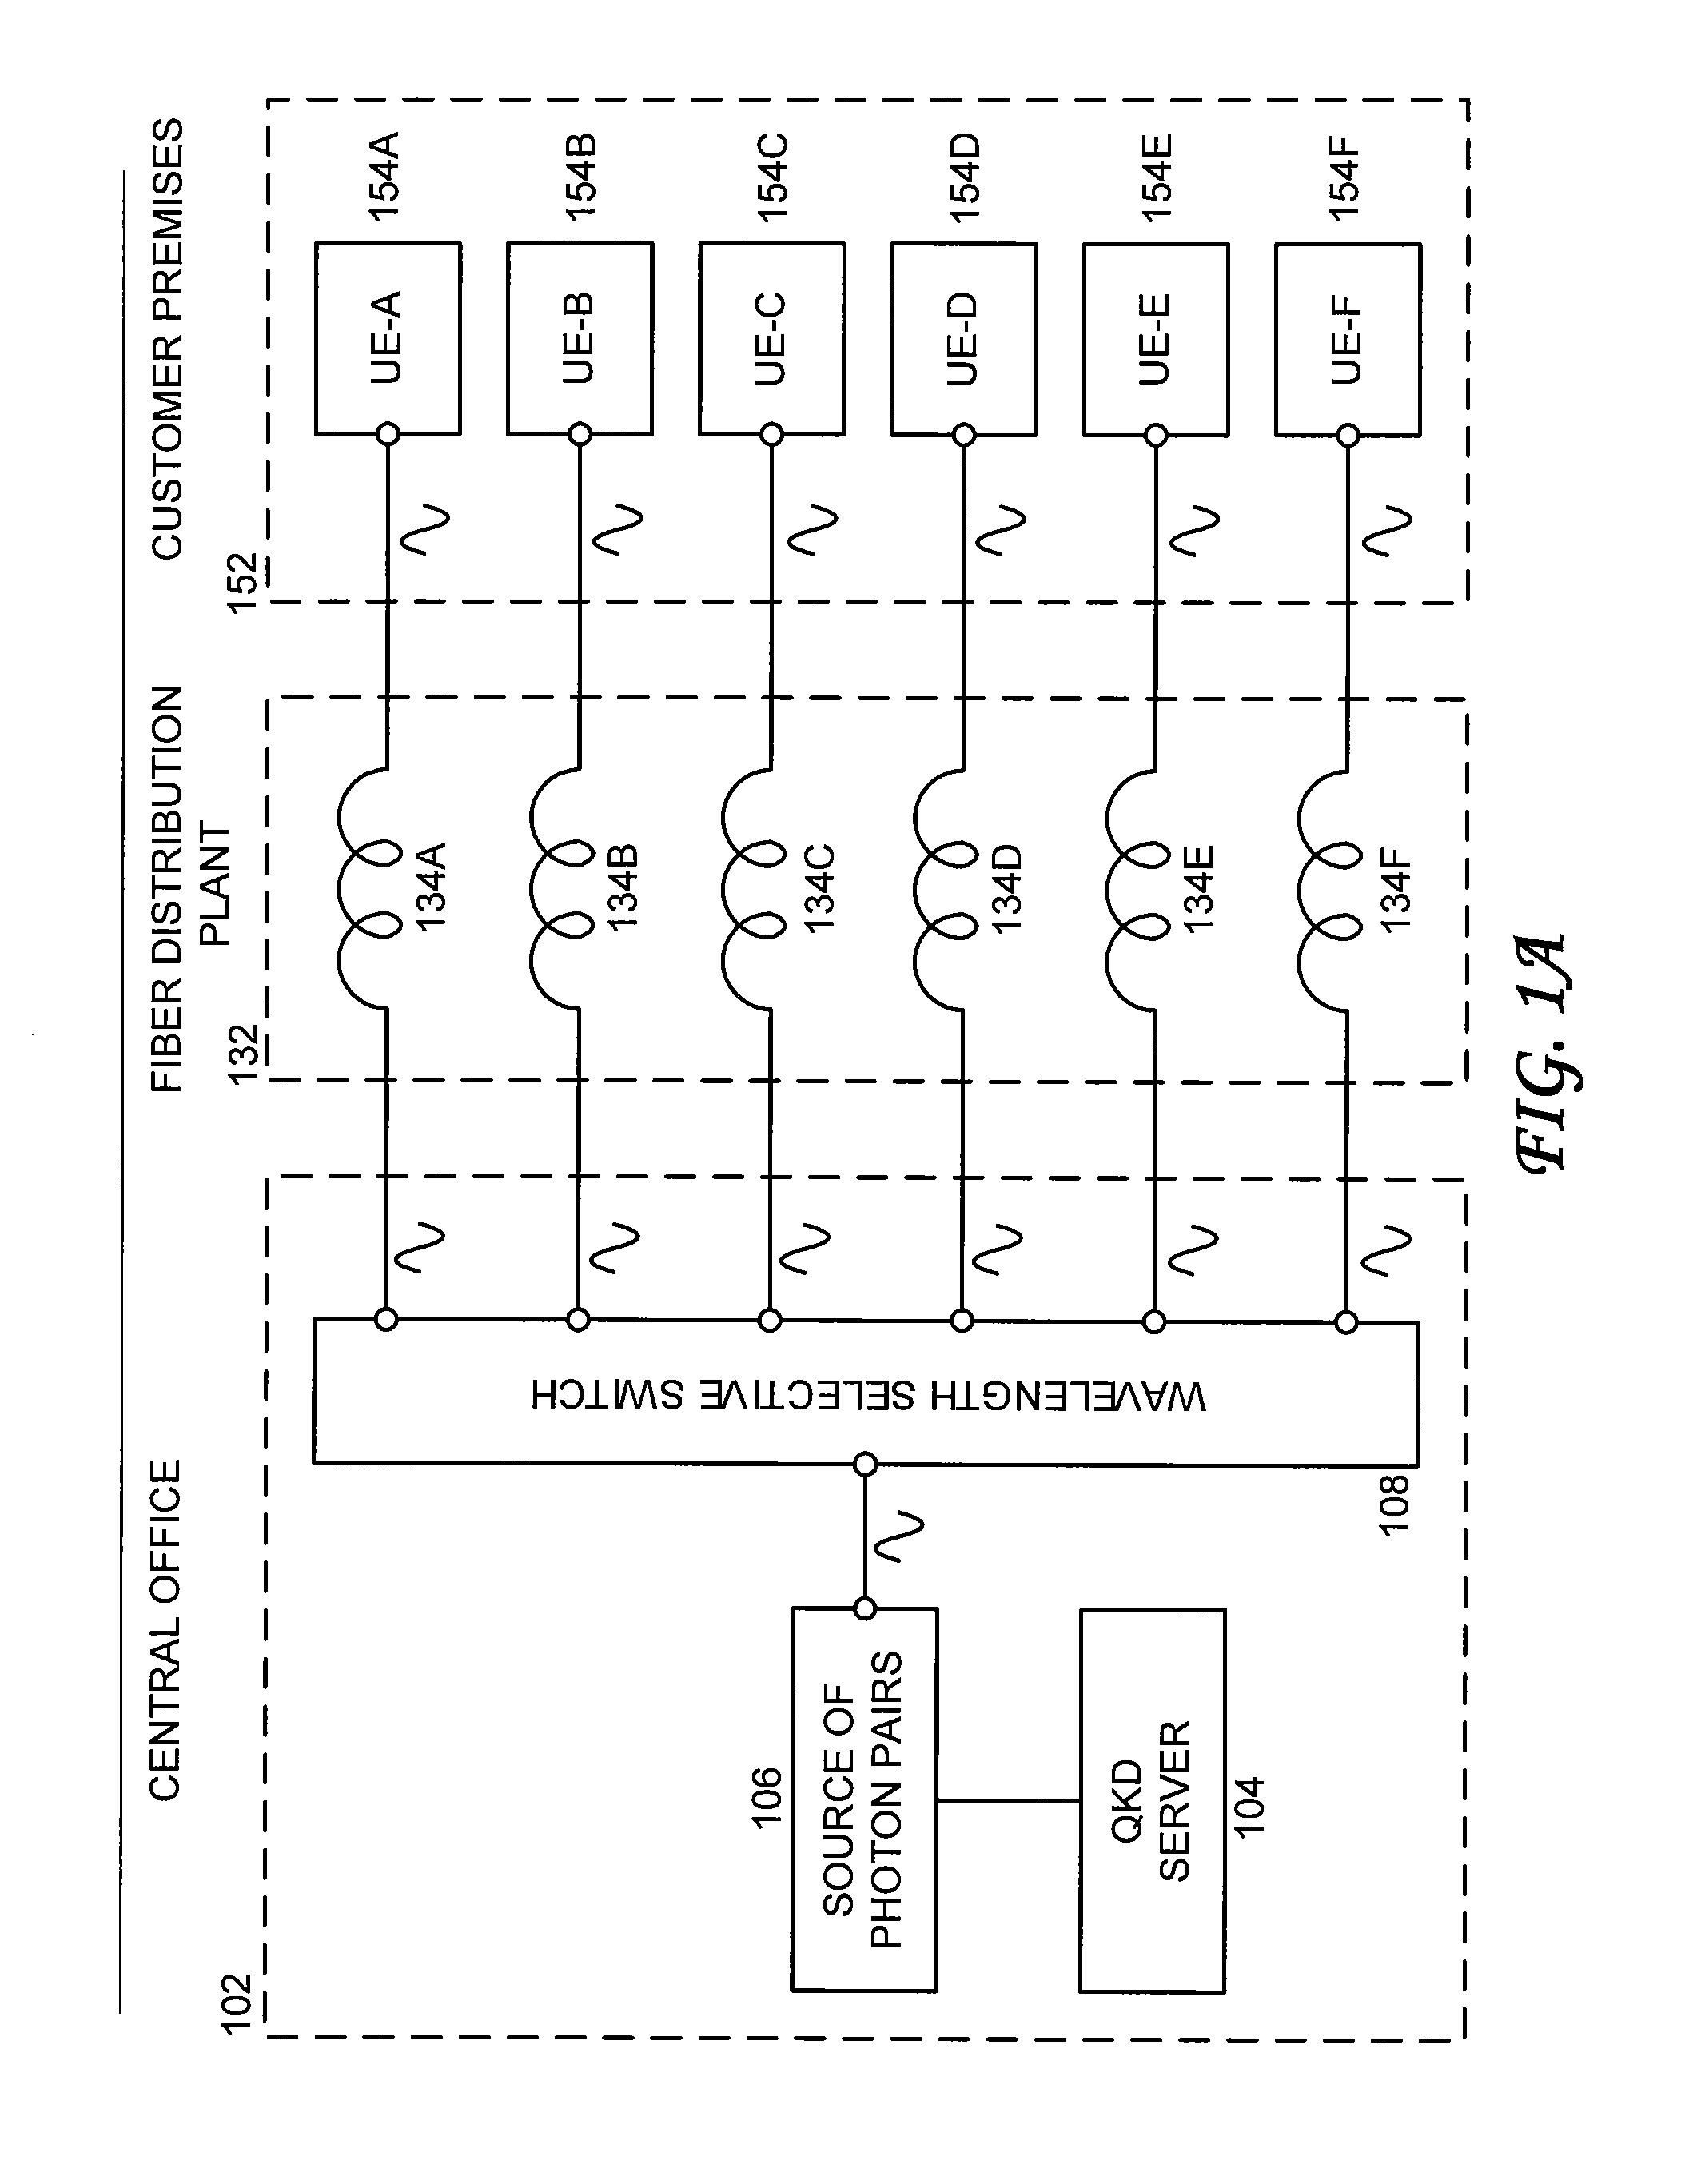 Bandwidth provisioning for an entangled photon system